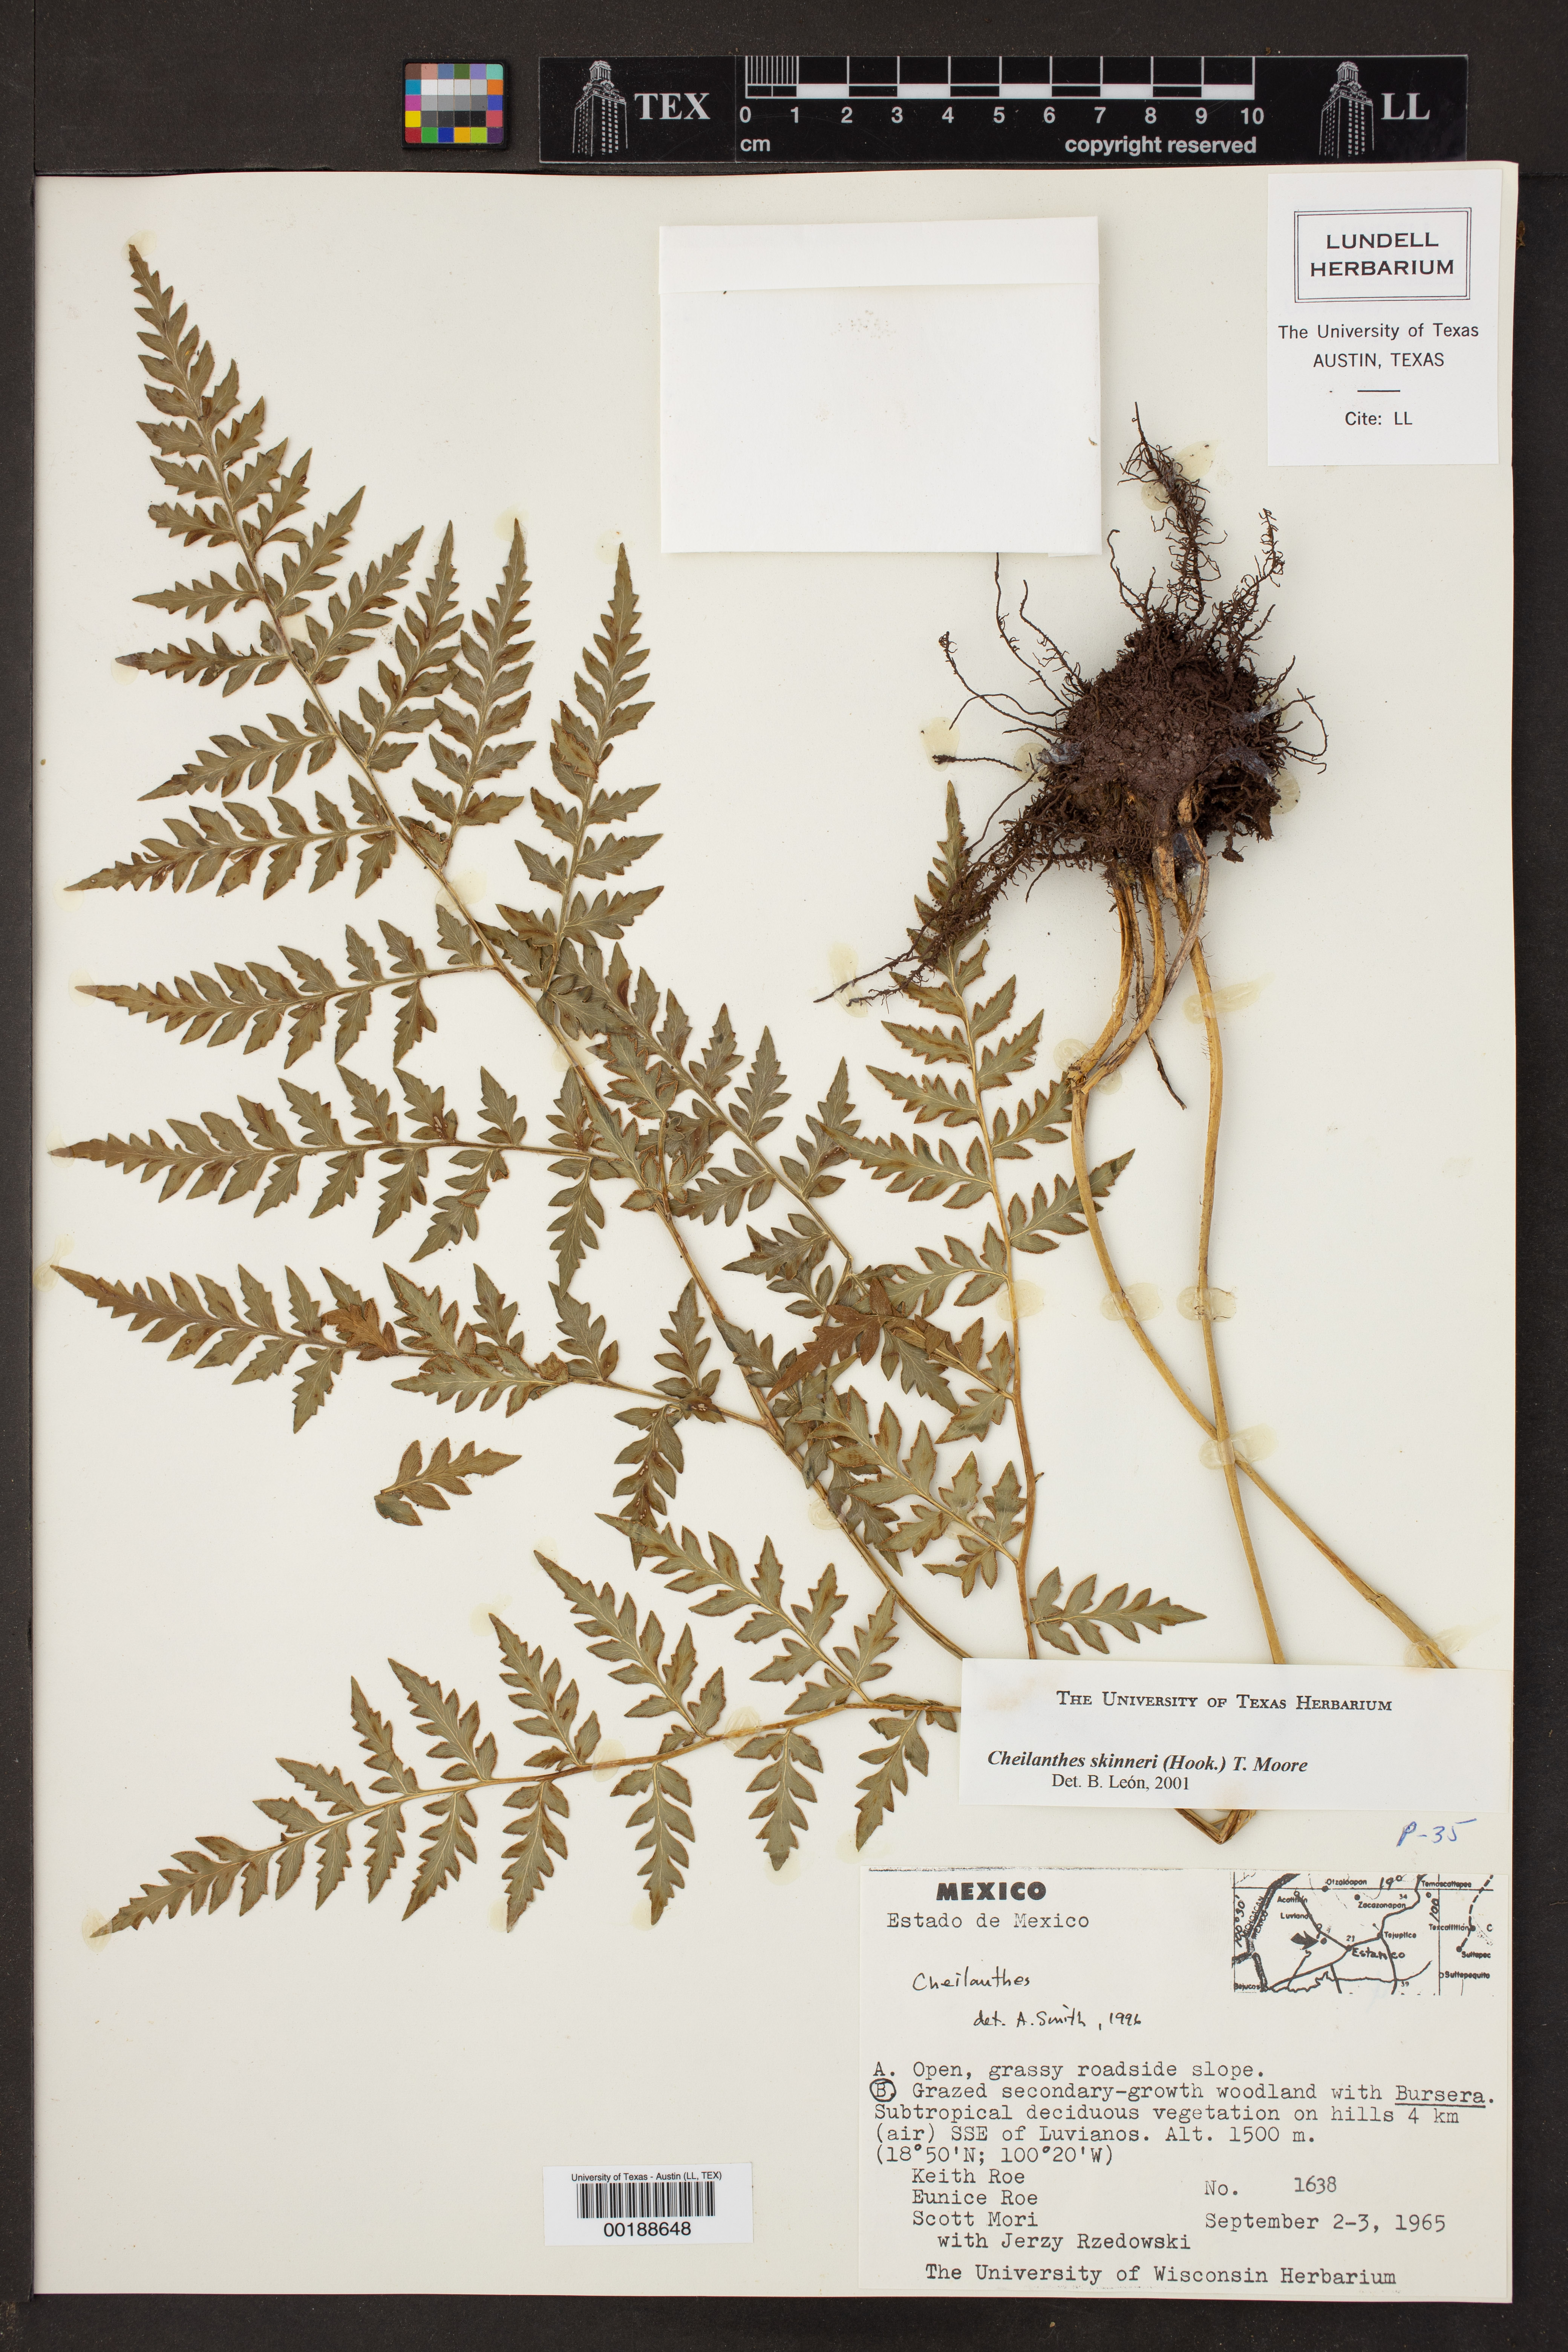 Cheilanthes skinneri image